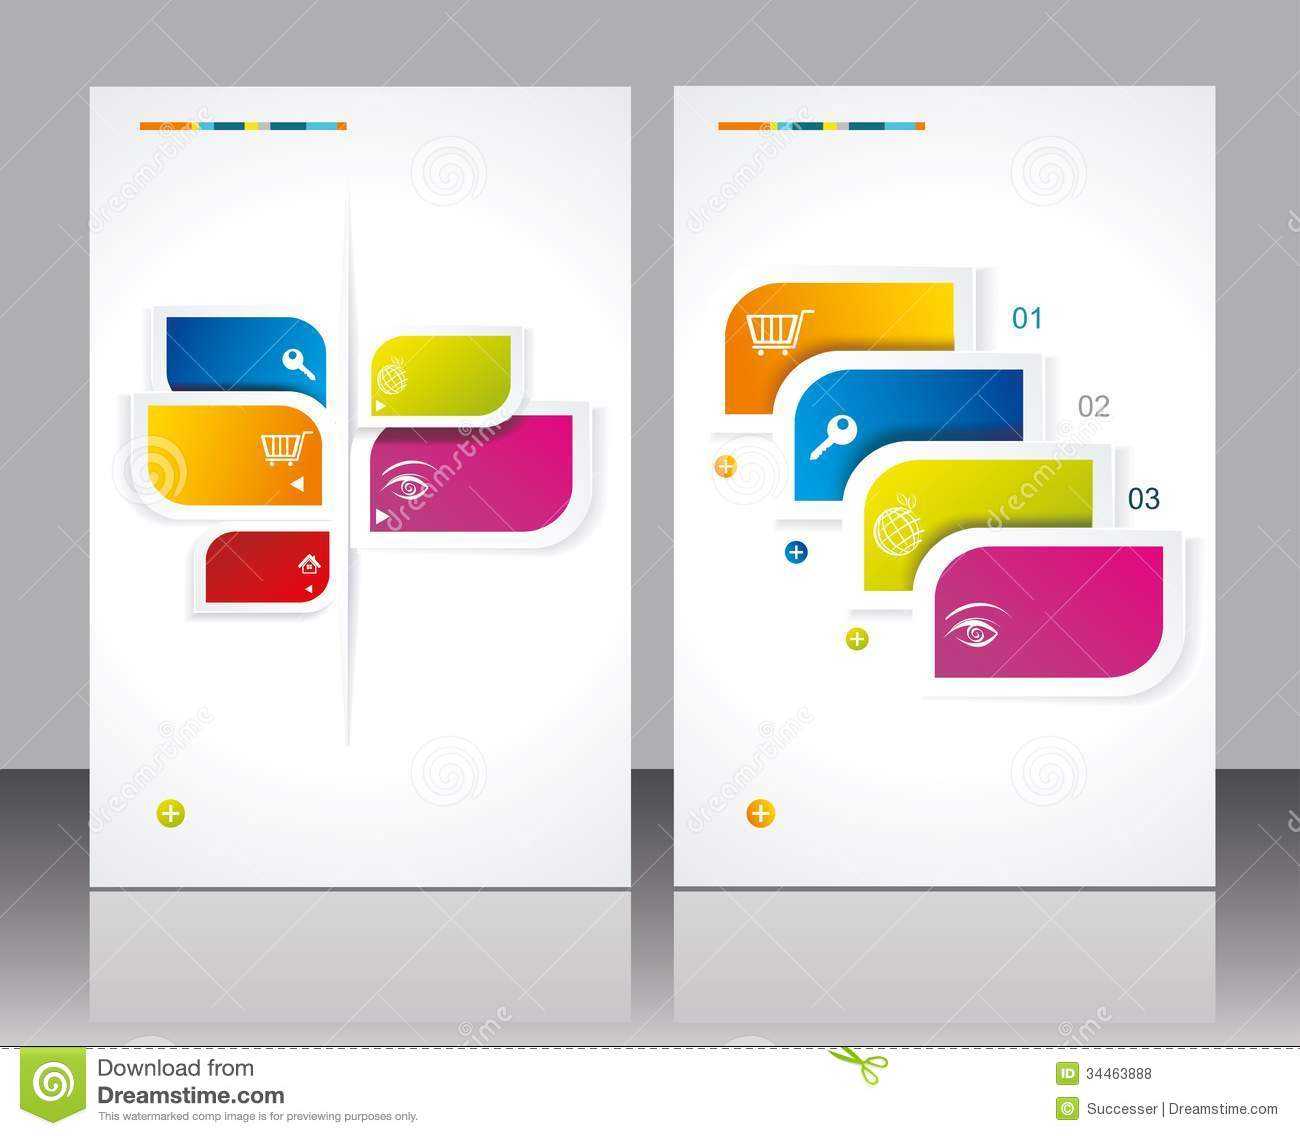 12 Free Vector Brochure Templates Images – Business Brochure With Regard To Creative Brochure Templates Free Download